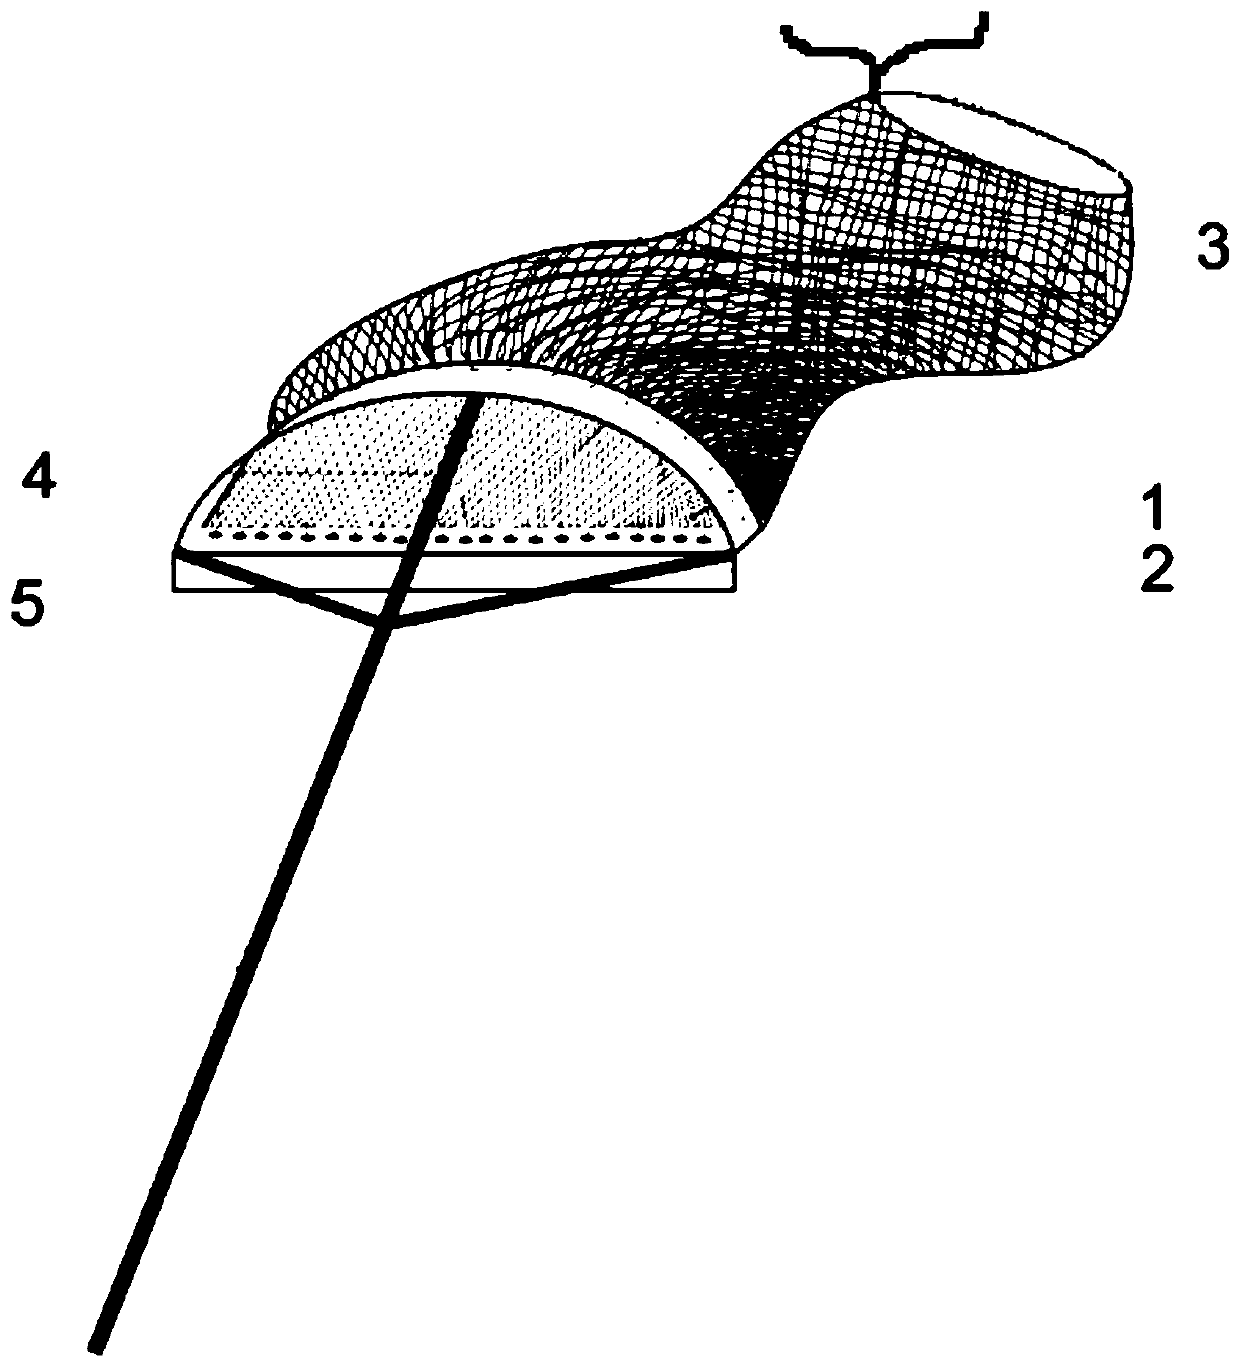 Burrowing-type shellfish rearing seedling catching device for sandy and muddy sediment pond and application method